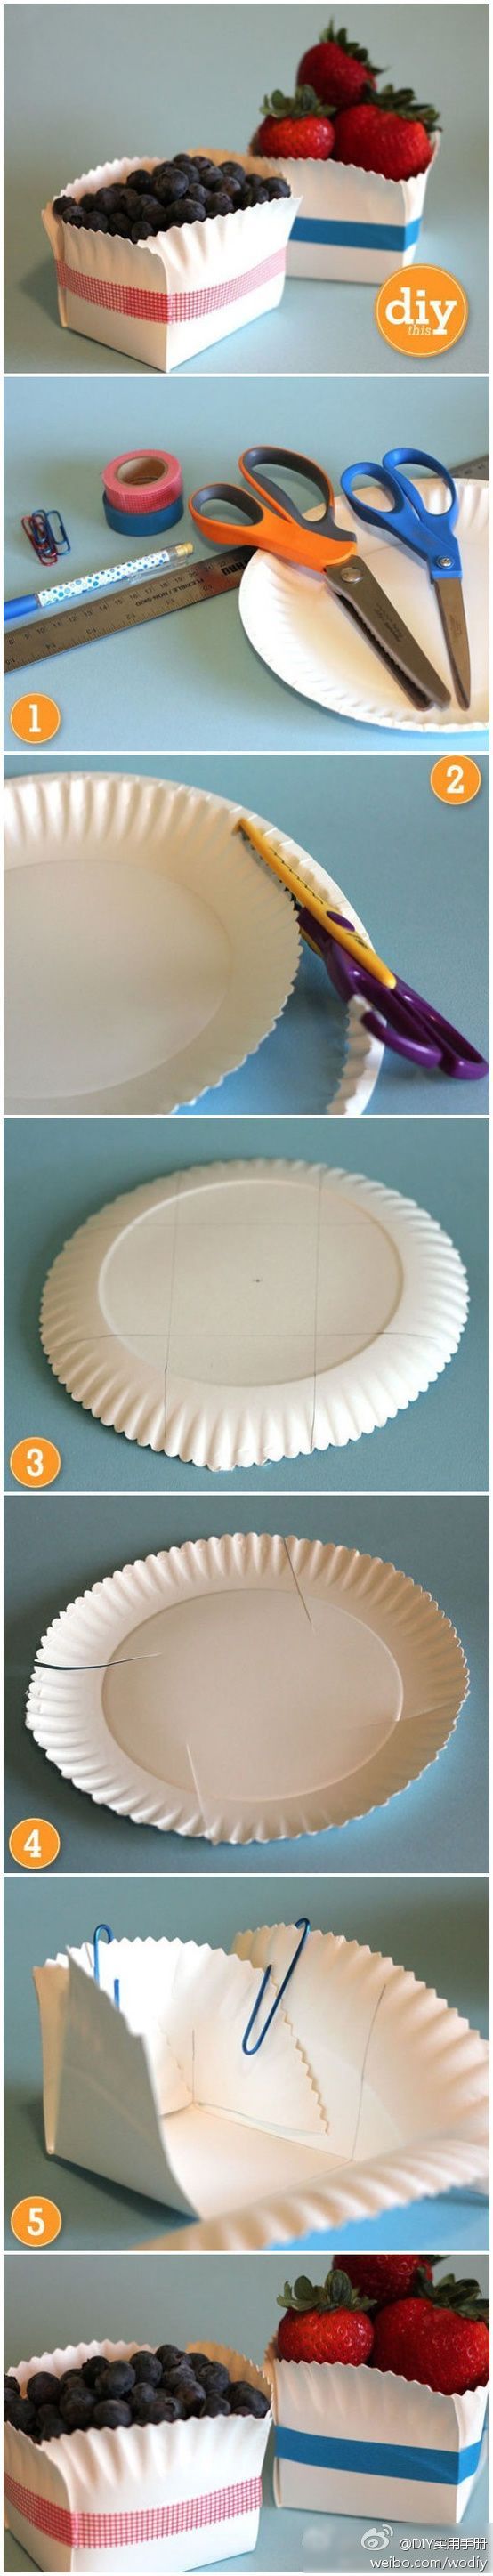 Cute way to make little snack boxes with paper plates. You can customize the col